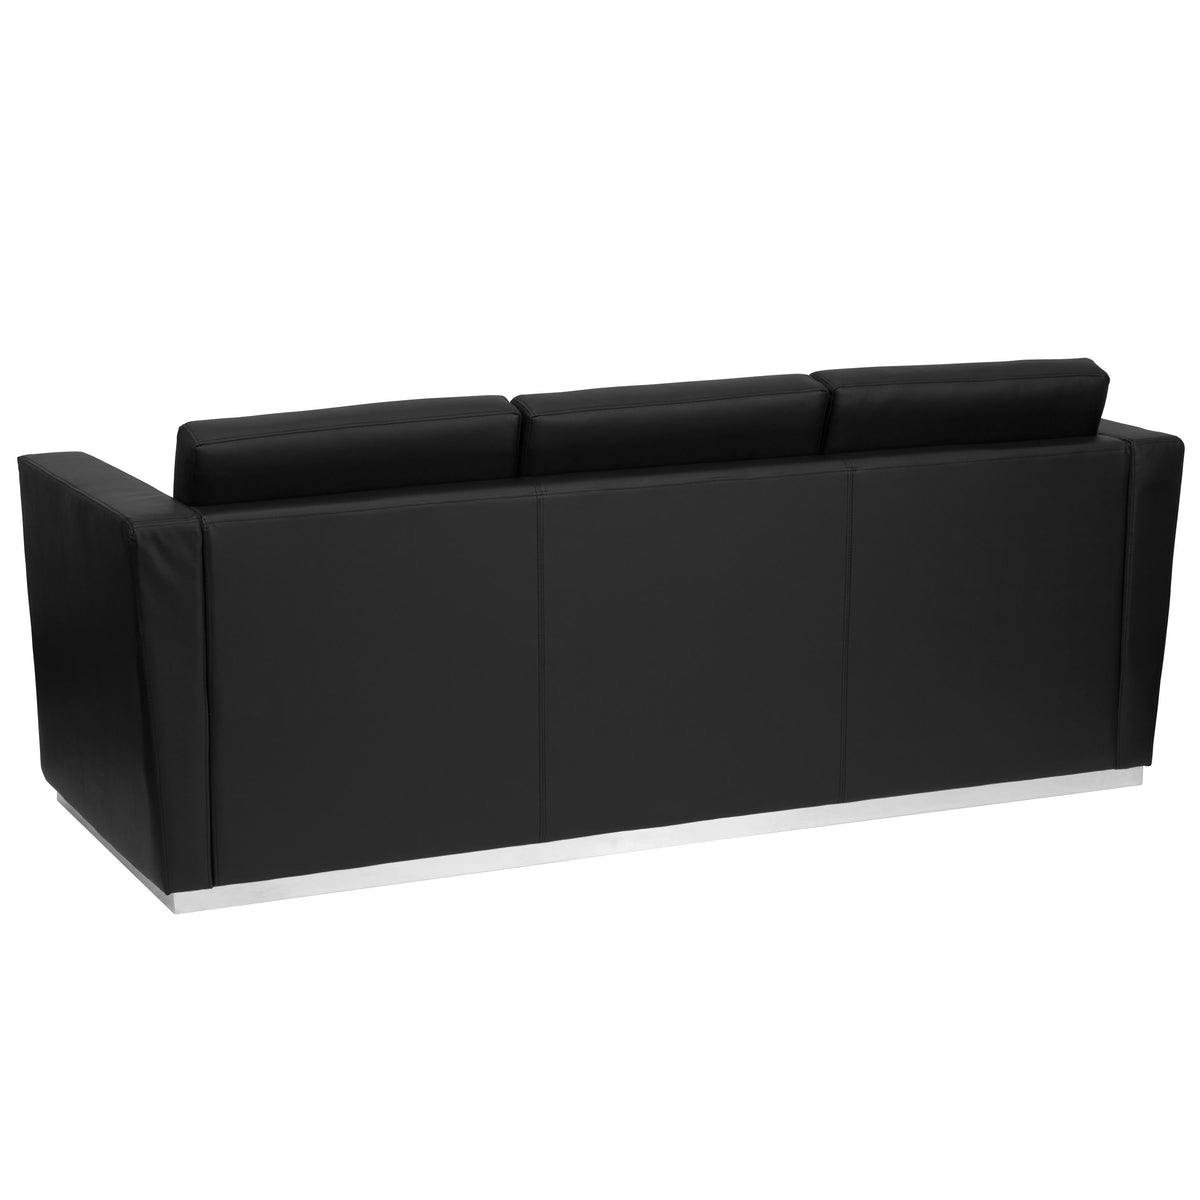 Contemporary Black LeatherSoft Sofa with Stainless Steel Recessed Base